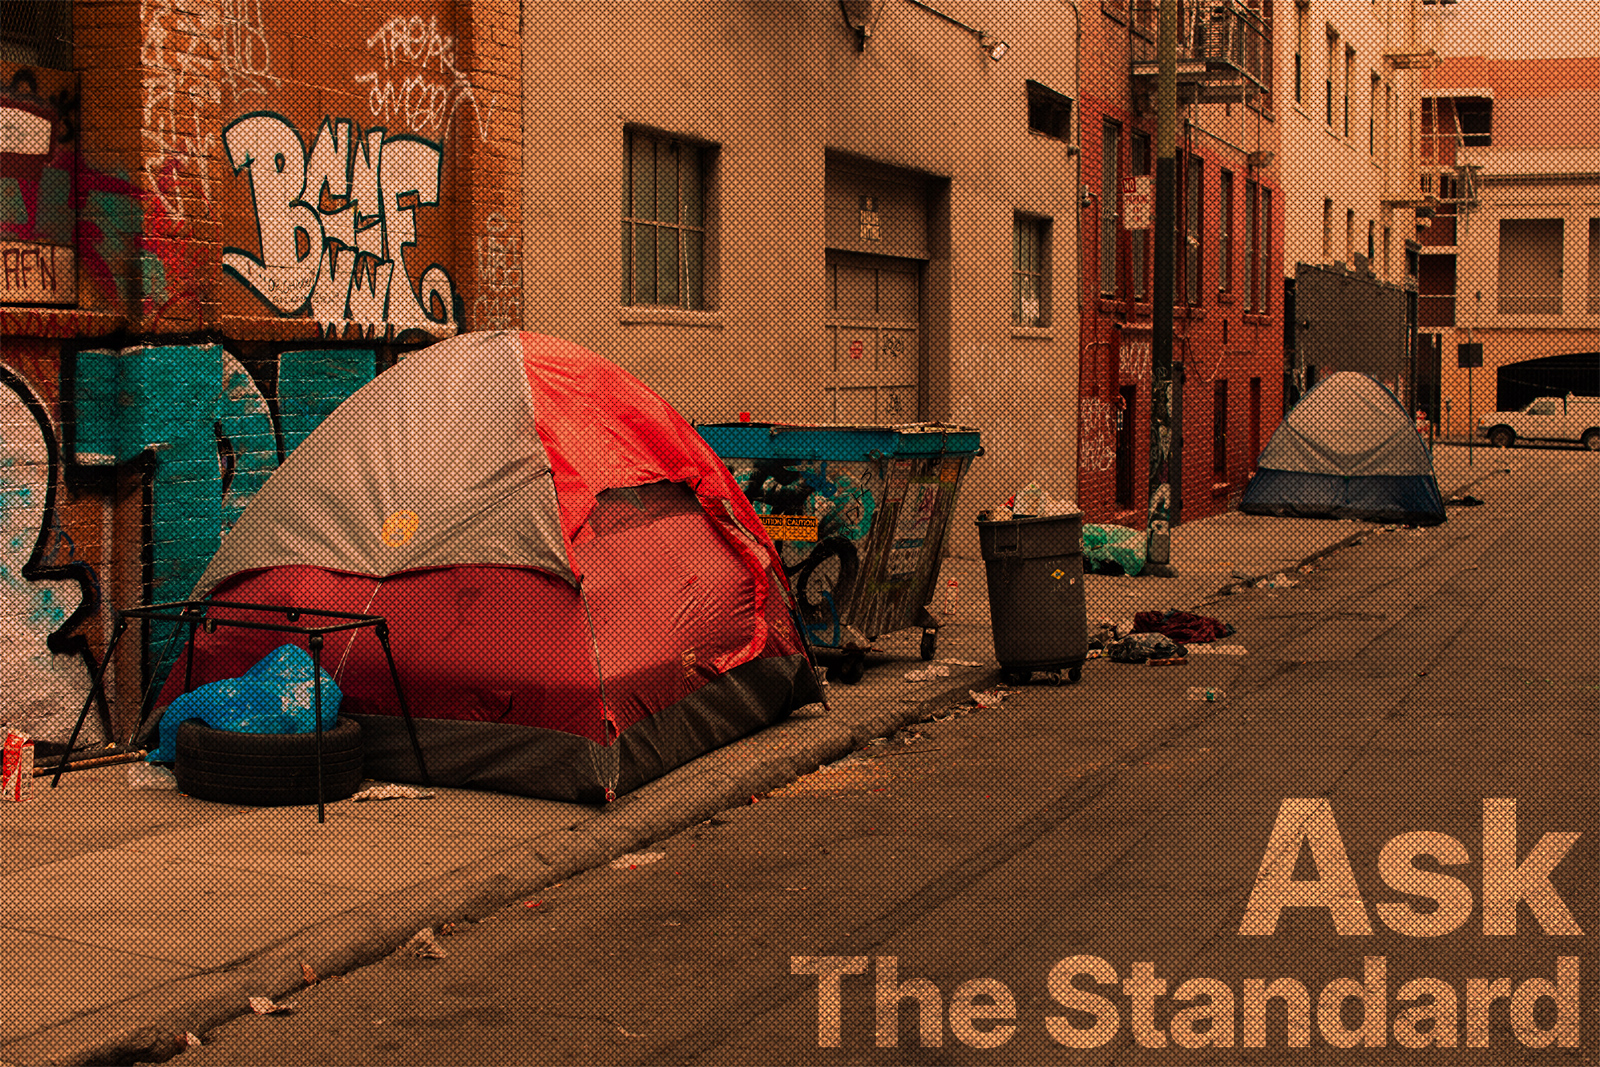 Tent encampment on an alley in San Francisco